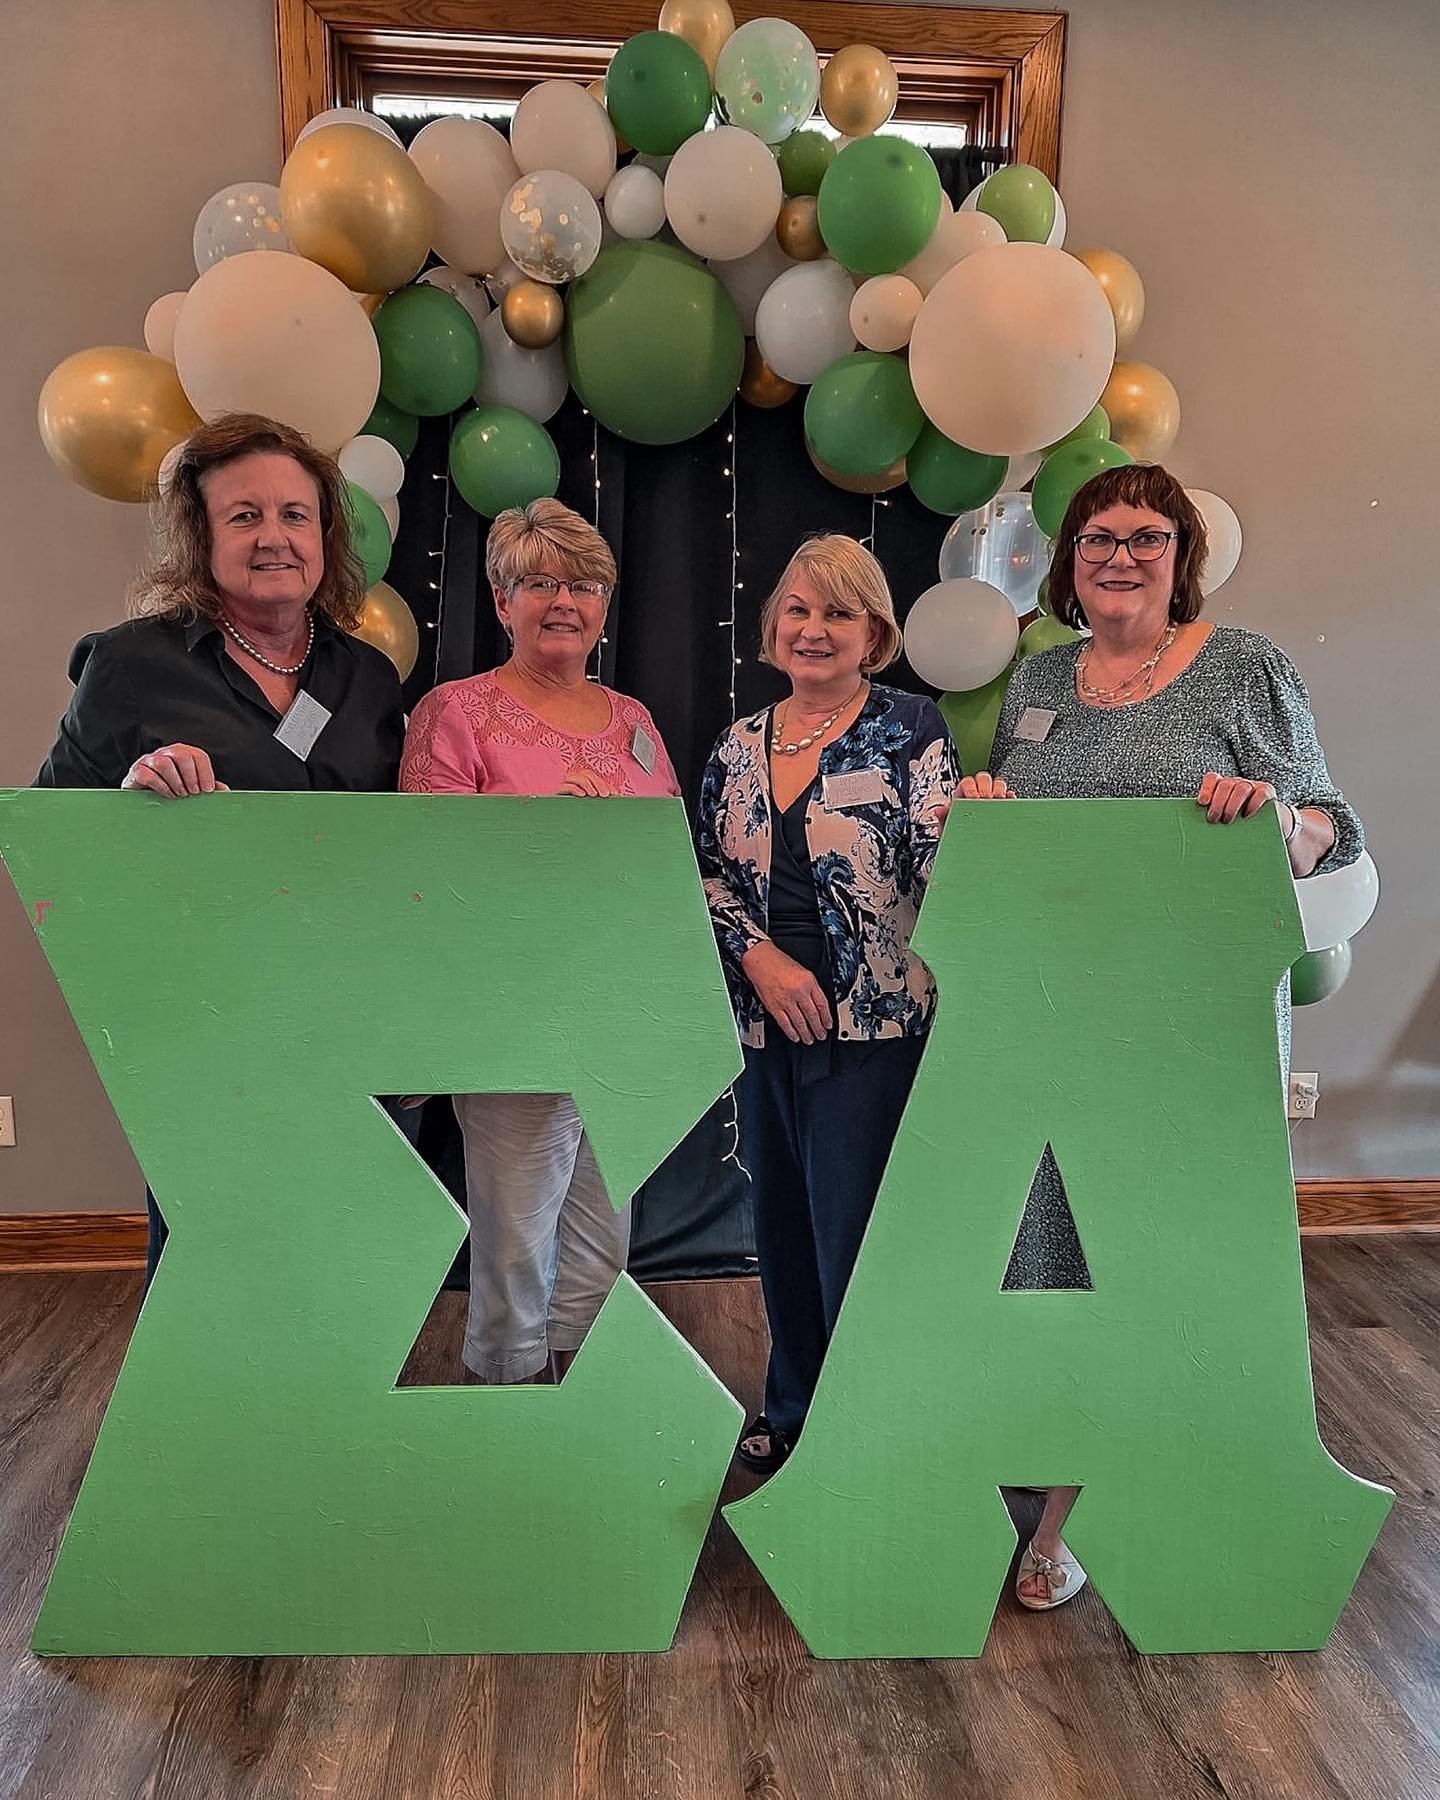 WE 🫶 OUR ALUMNI! 
-
What a beautiful weekend spent with the amazing women that came before us! The Purdue Sigma Alpha Beta Chapter would not be the same without your legacy and the path you paved for us here in West Lafayette! 💚